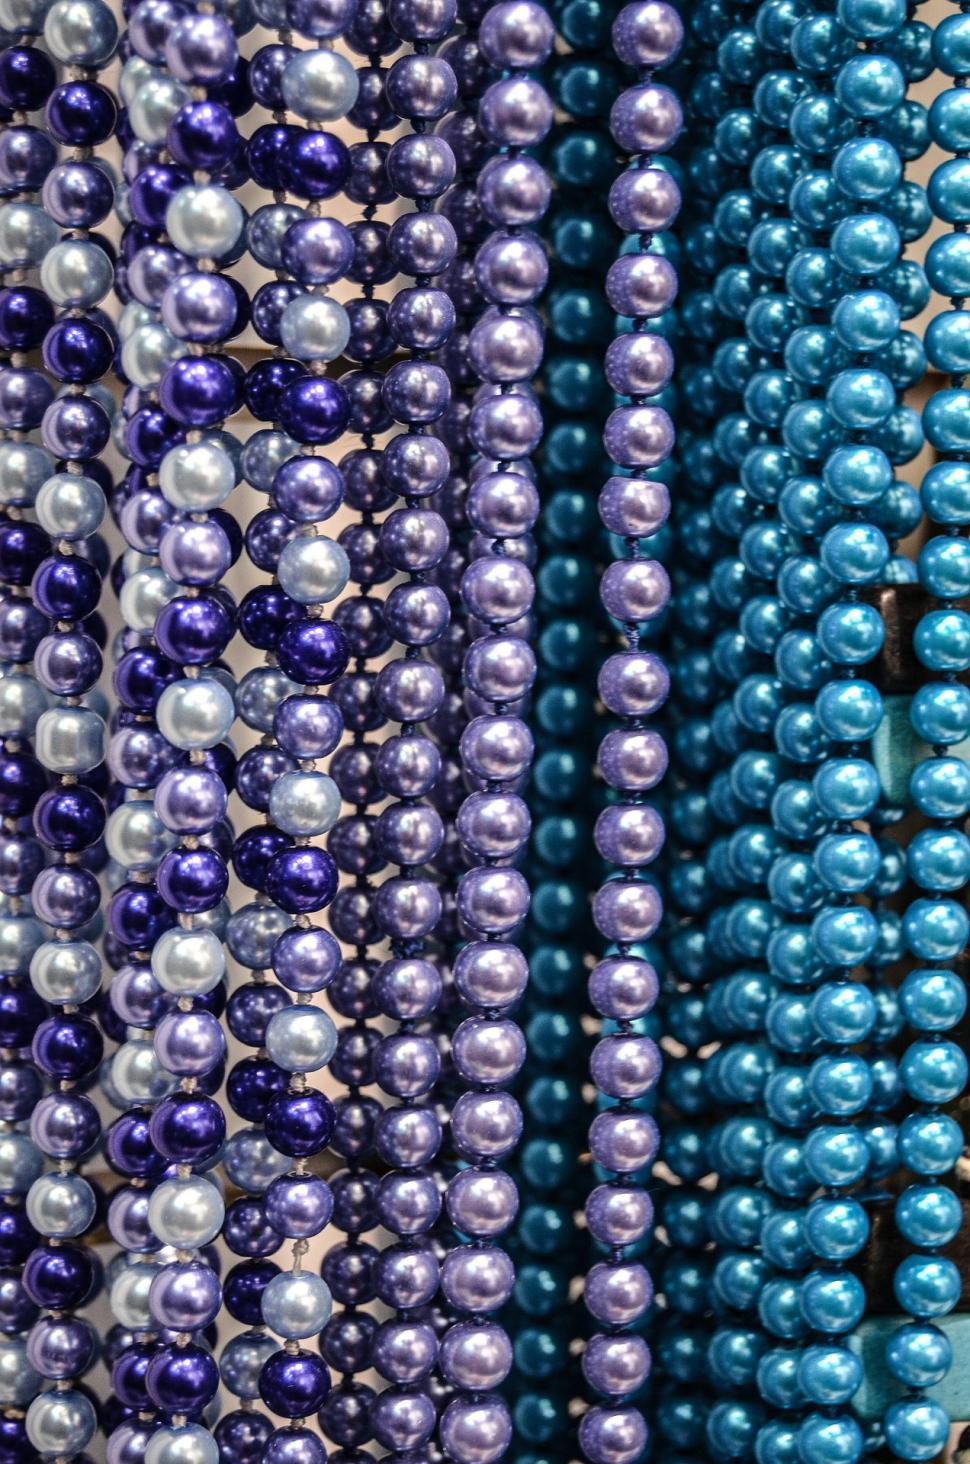 Free Image of Array of Beads Hanging on Wall 